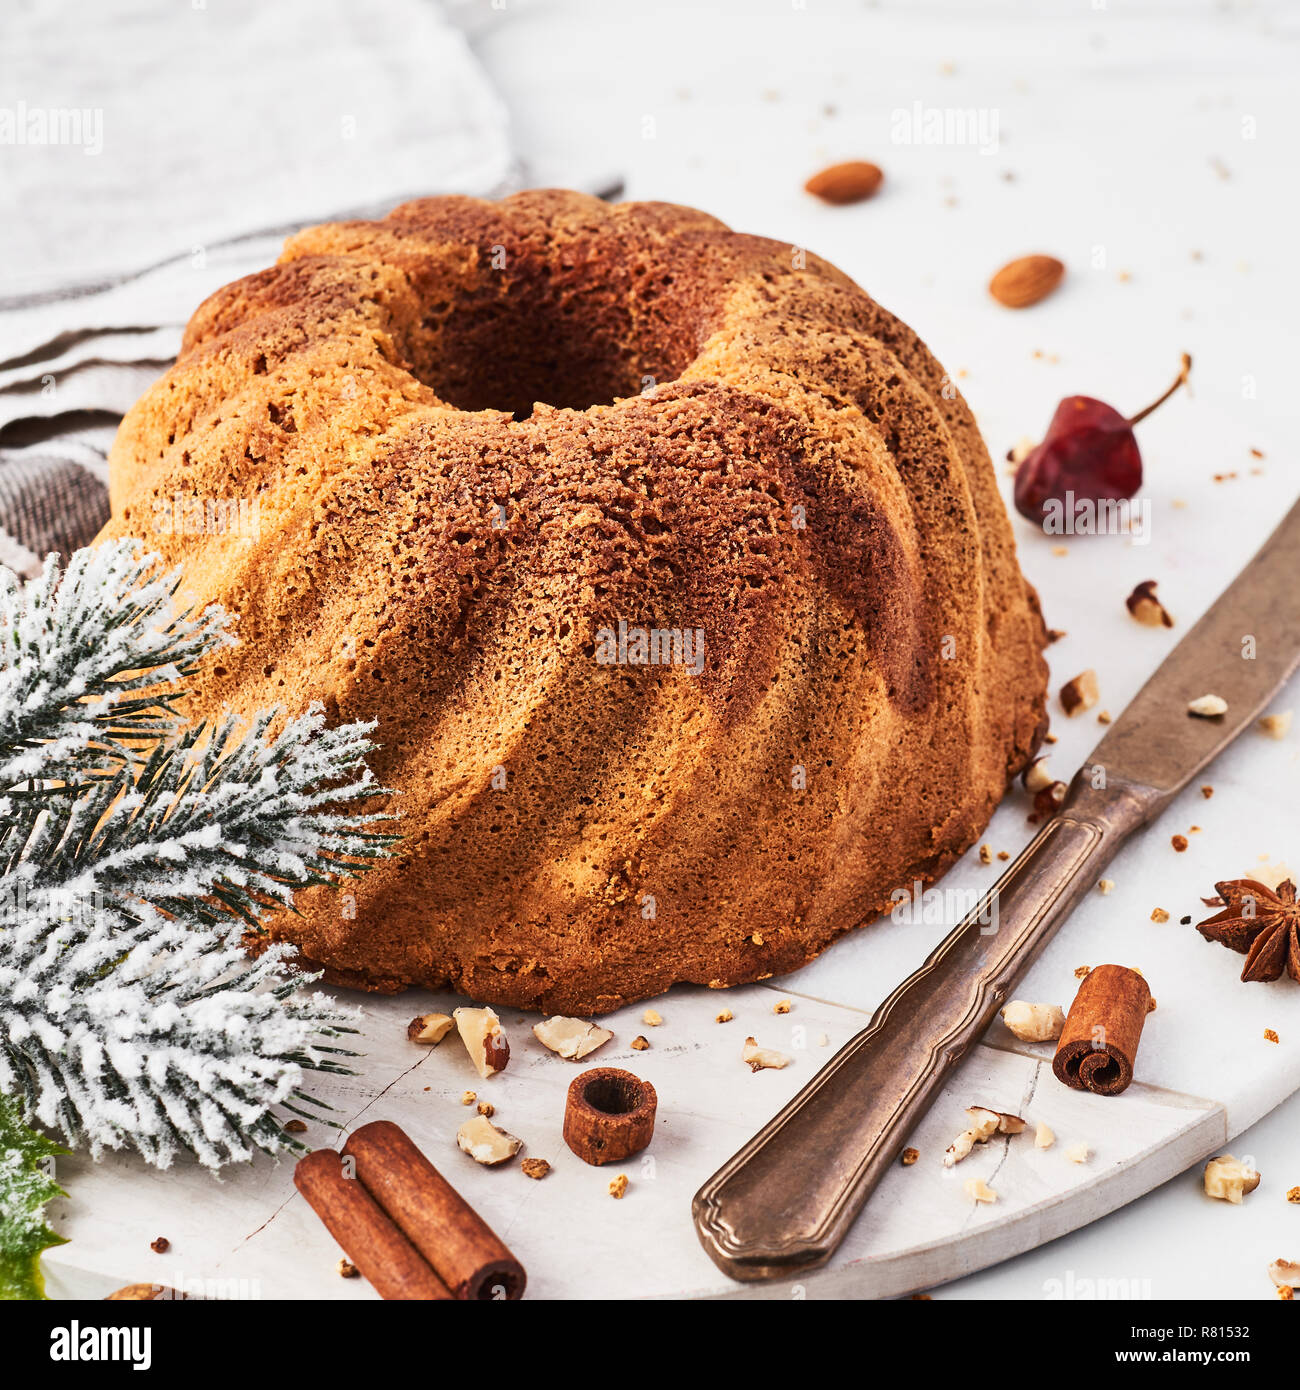 Vanilla and chocolate marble bundt cake surrounded by cinnamon, anise, hazelnut, dried orange crumbs on marble serving plate over white marble table.  Stock Photo